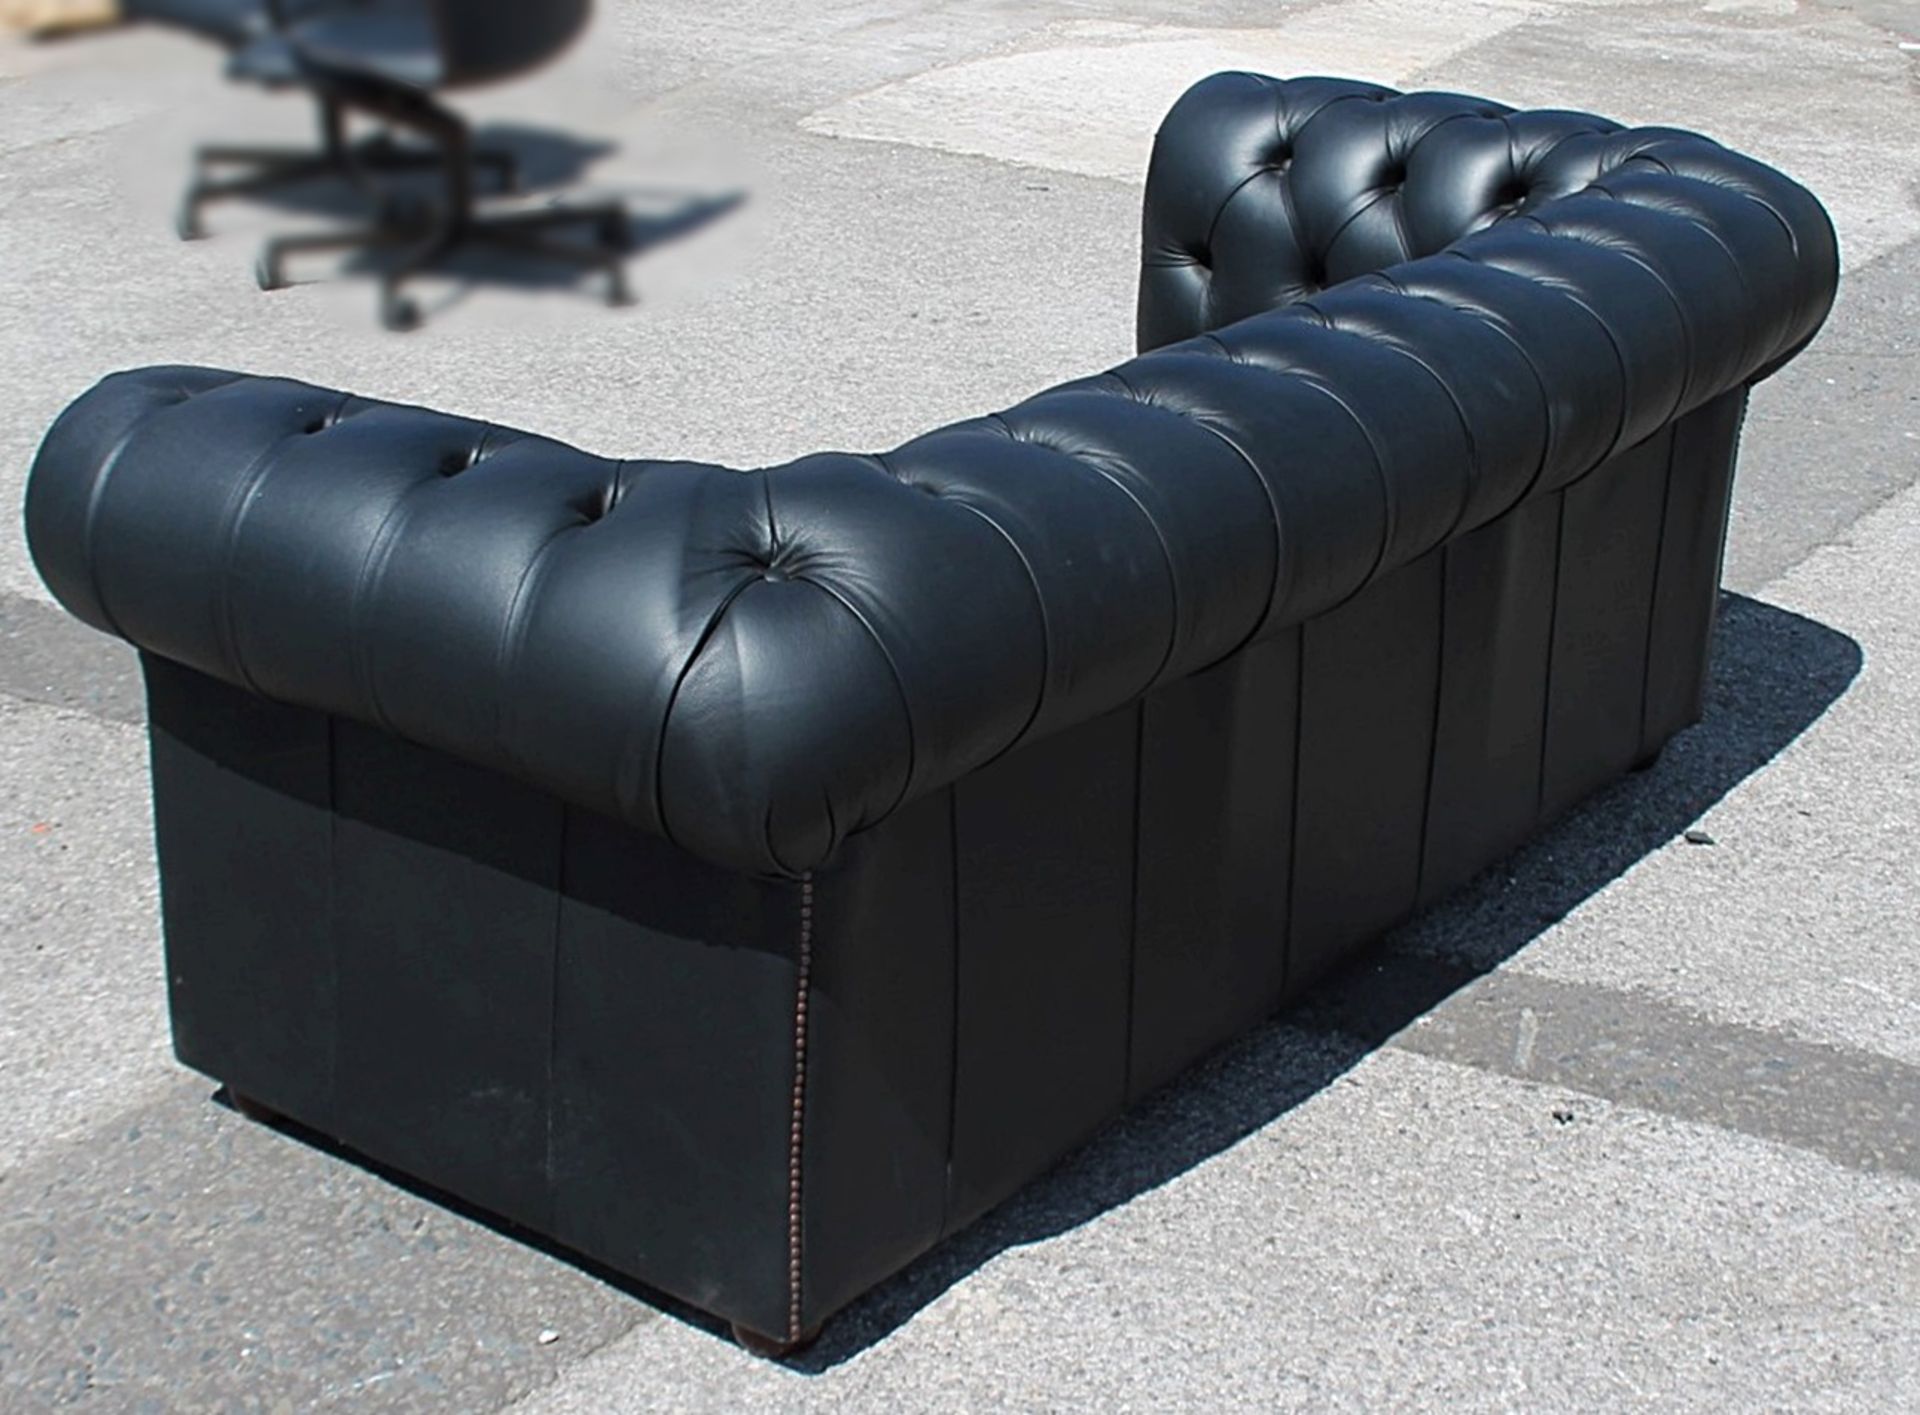 1 x Chesterfield-style 2-Metre Button-Back Sofa Upholstered In A Black Faux Leather - Image 3 of 6